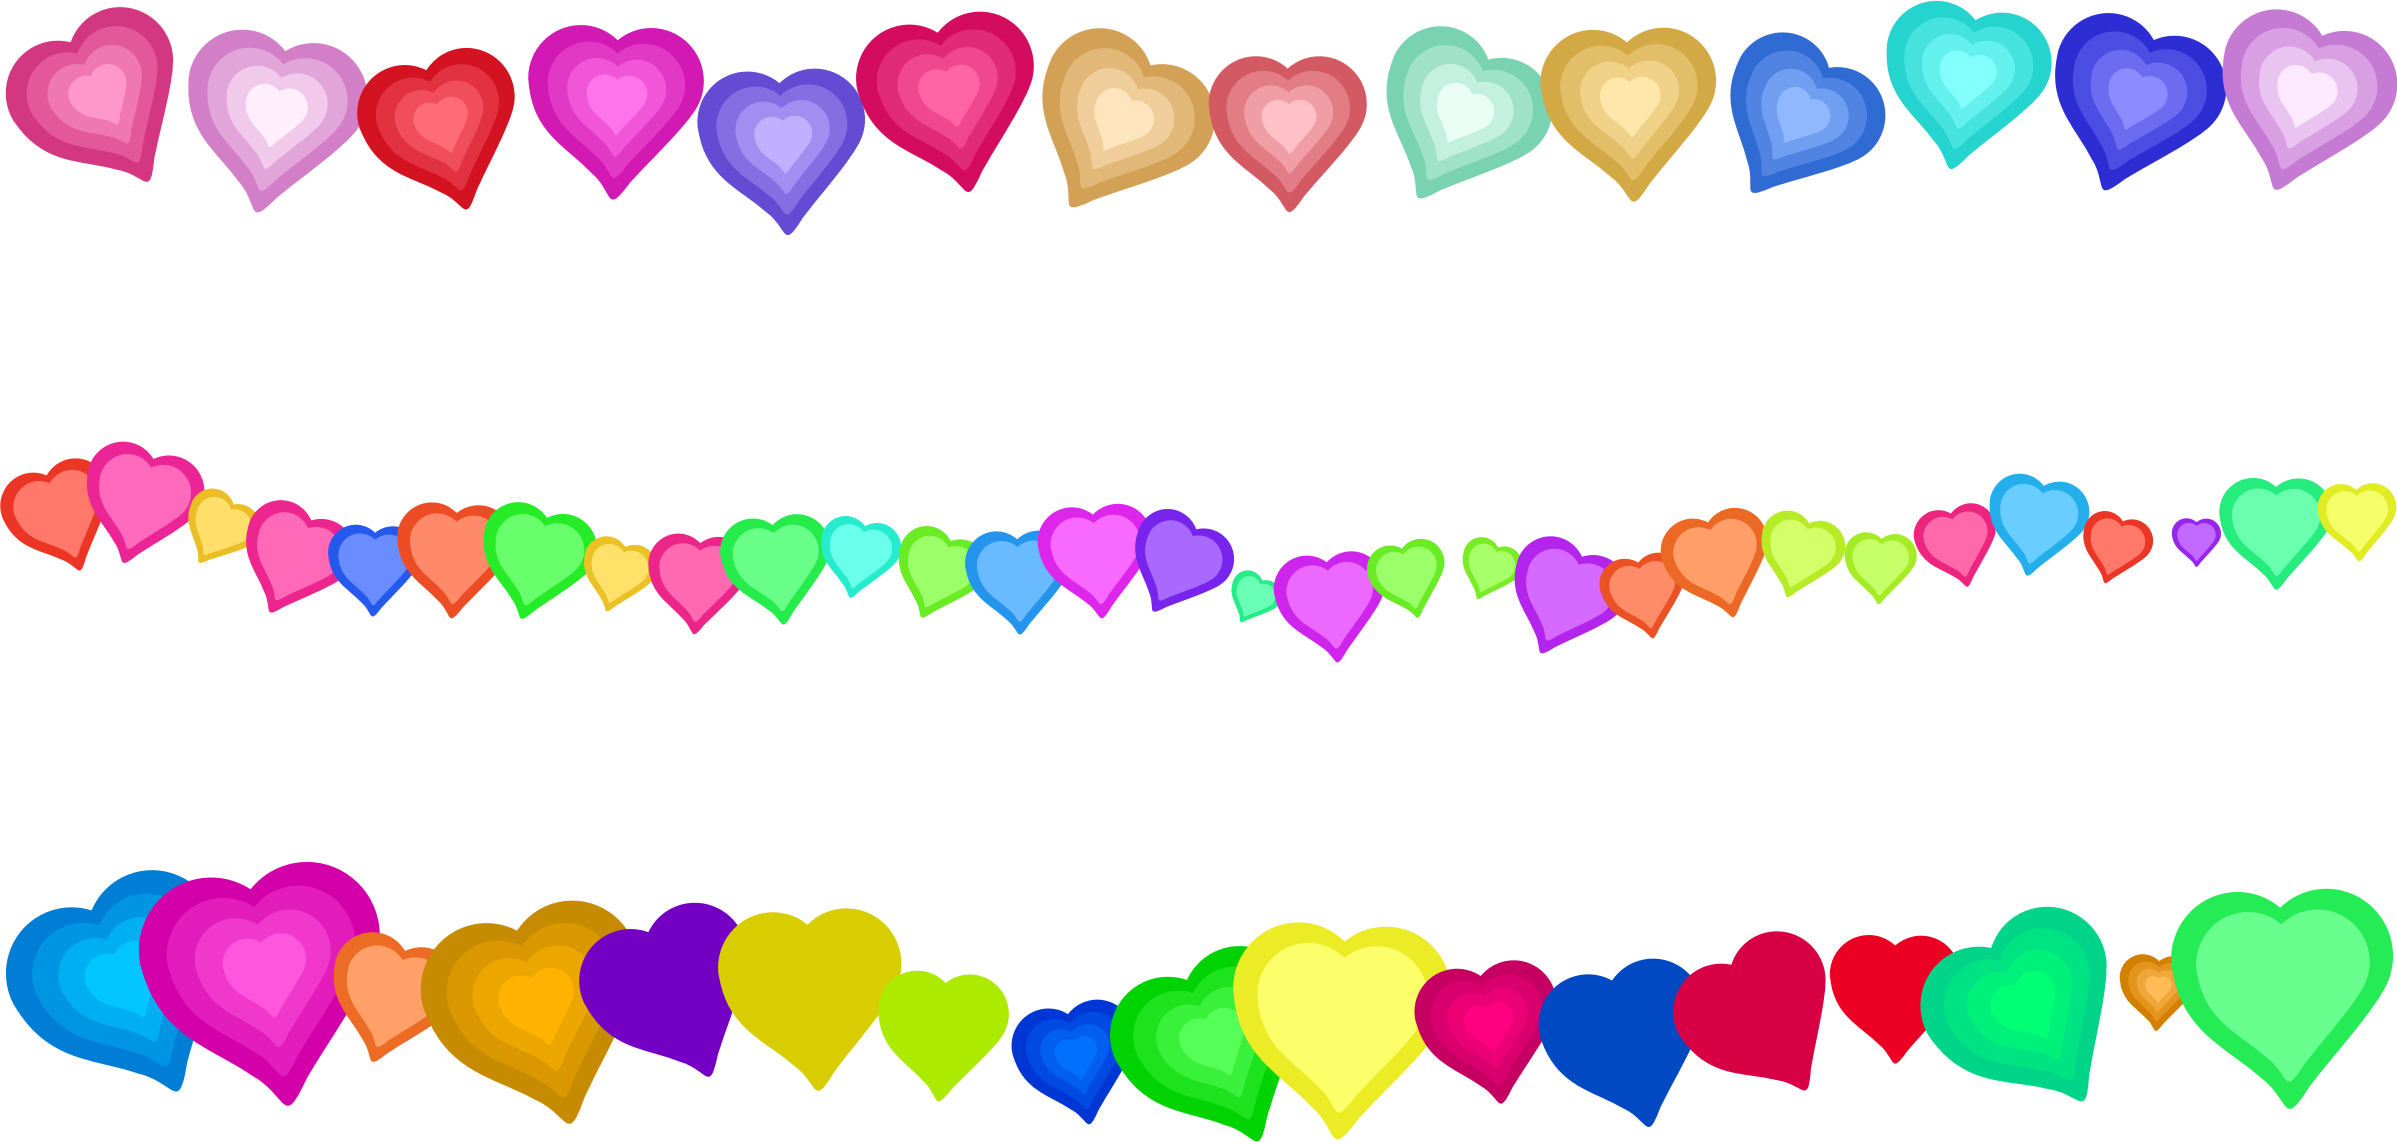 A Row Of Colorful Hearts